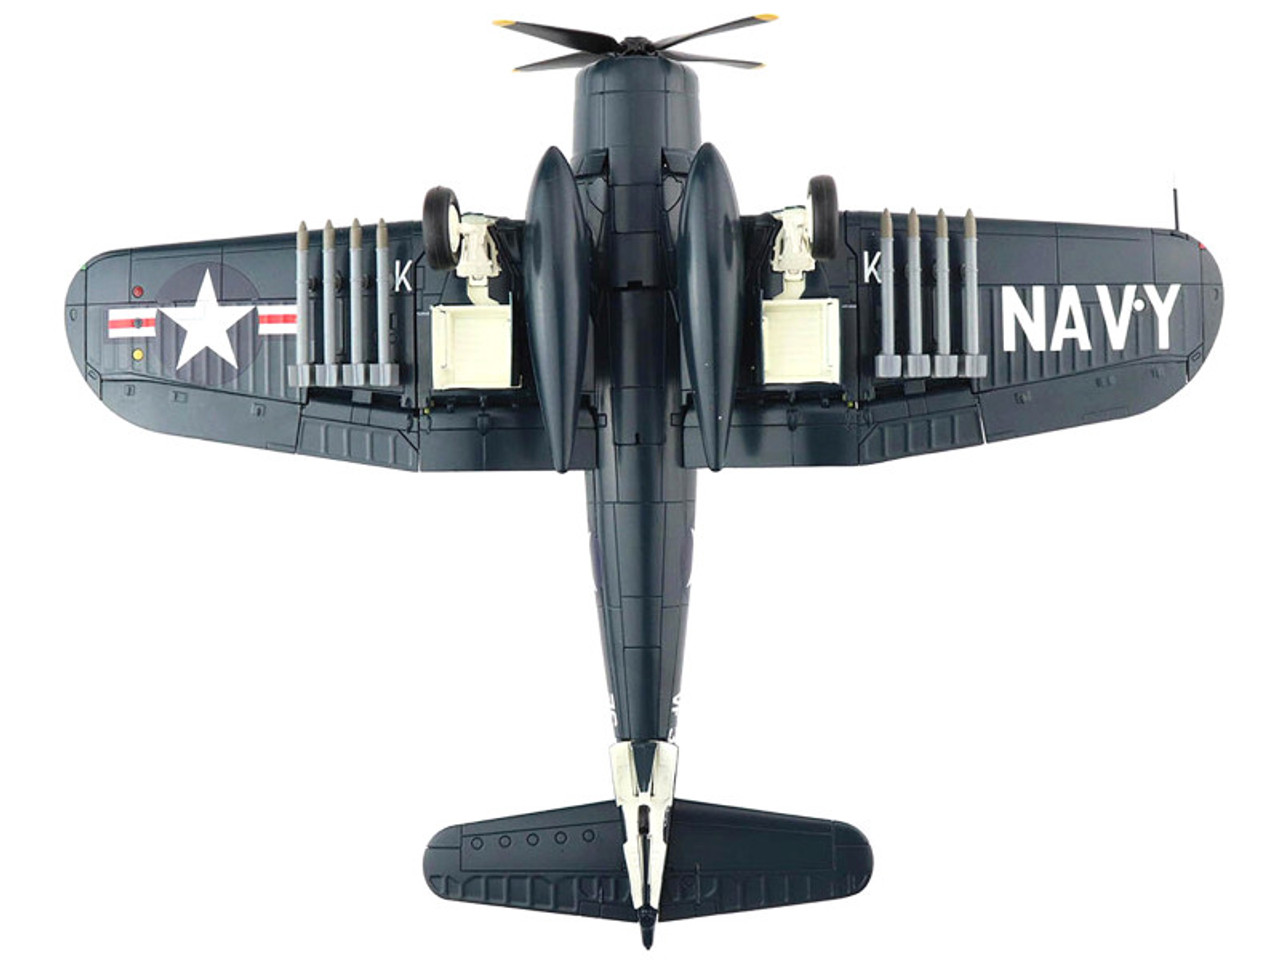 Vought F4U-4 Corsair "Medal of Honor" Fighter Aircraft White 205 "LTJG Thomas (Lou) Hudner VF-32 USS Leyte" (4th Dec 1950) "Air Power Series" 1/48 Diecast Model by Hobby Master